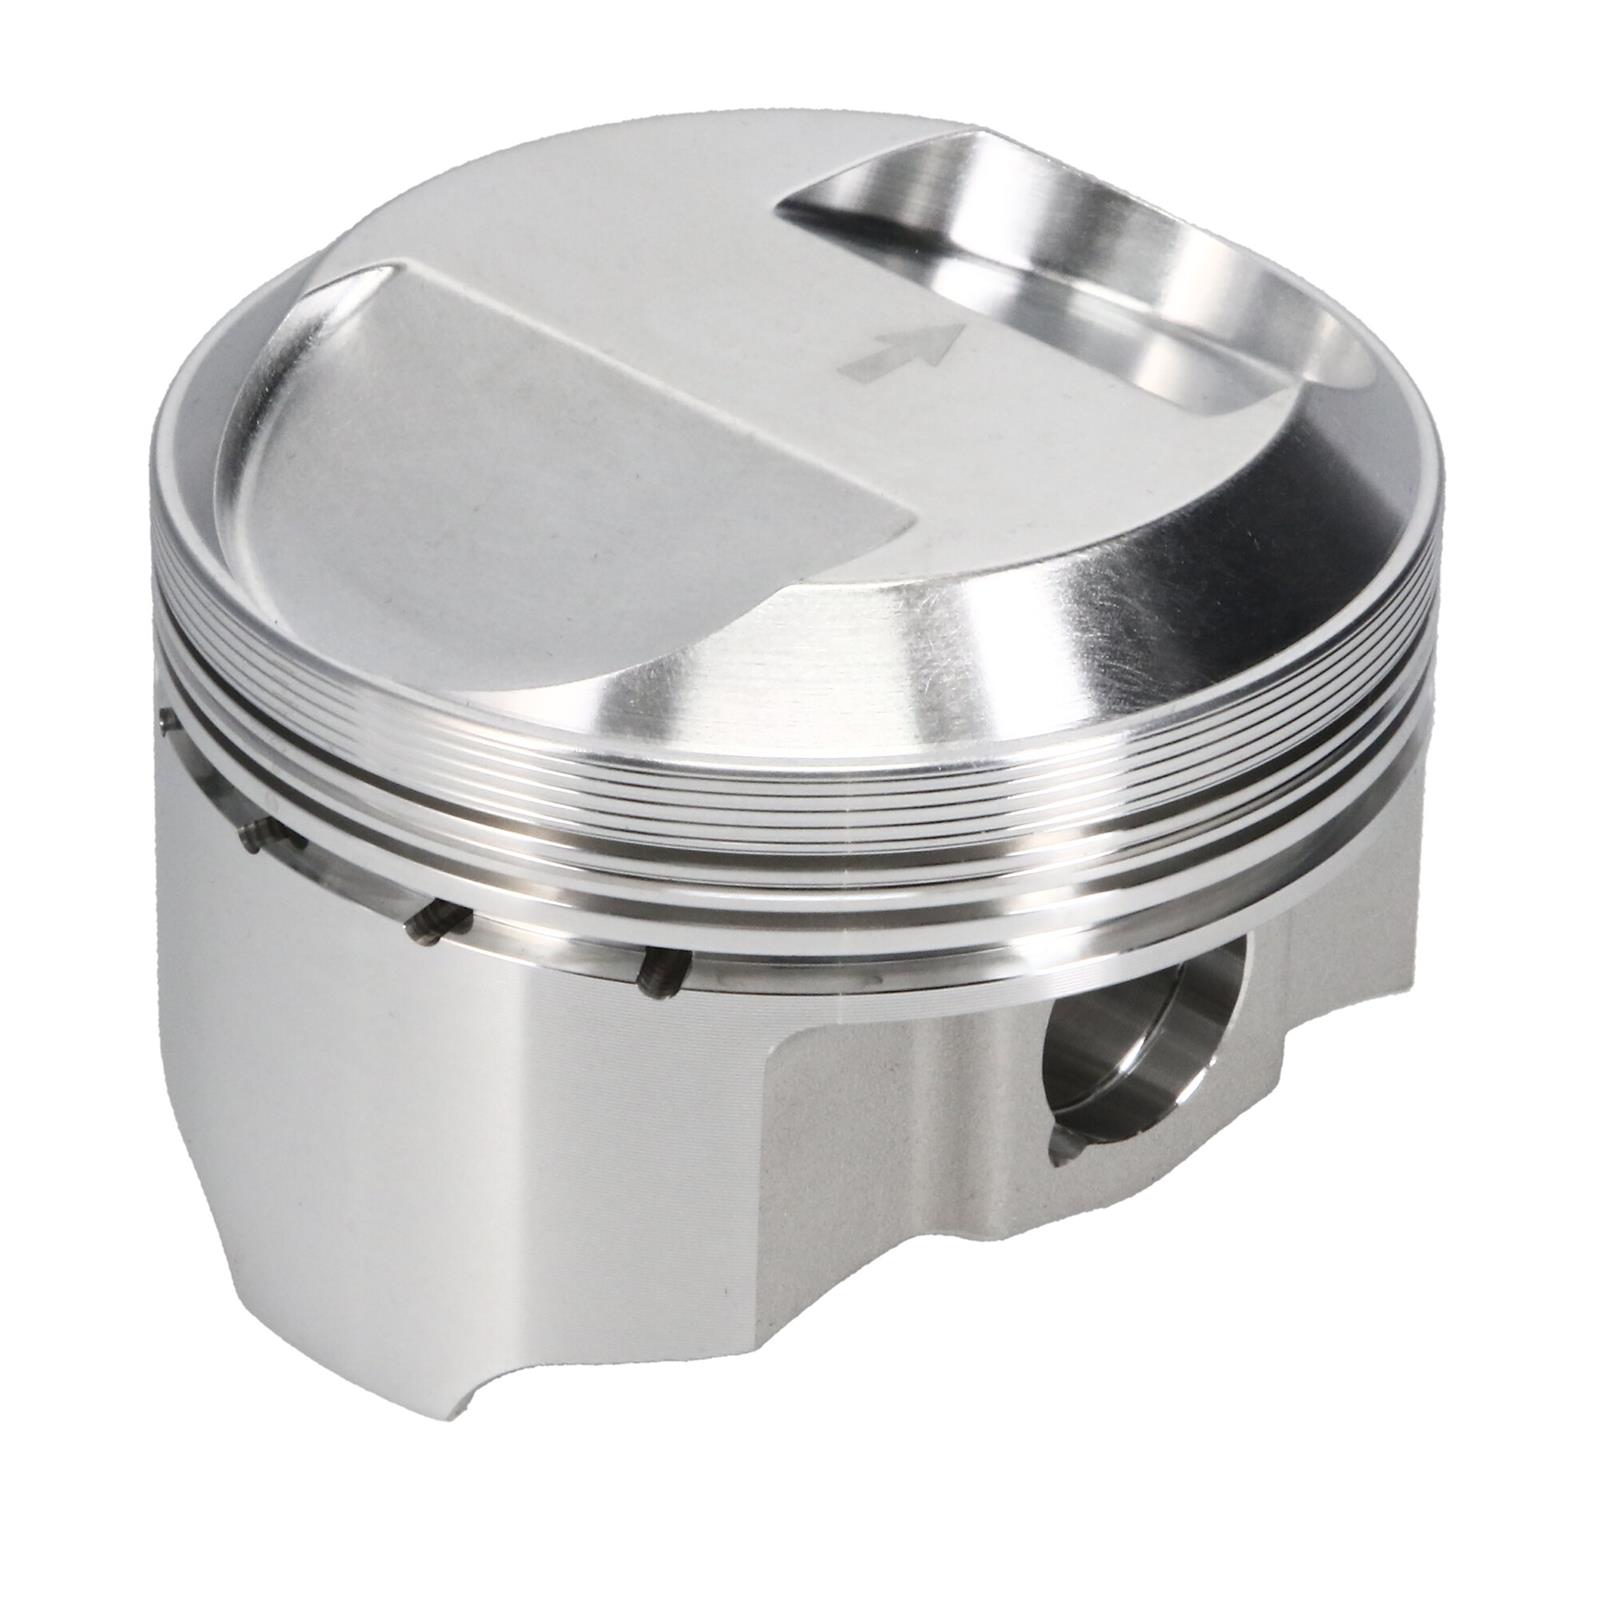 Wiseco 4767M08900 Wiseco Powersports 4-Stroke Forged Series Piston Kits |  Summit Racing